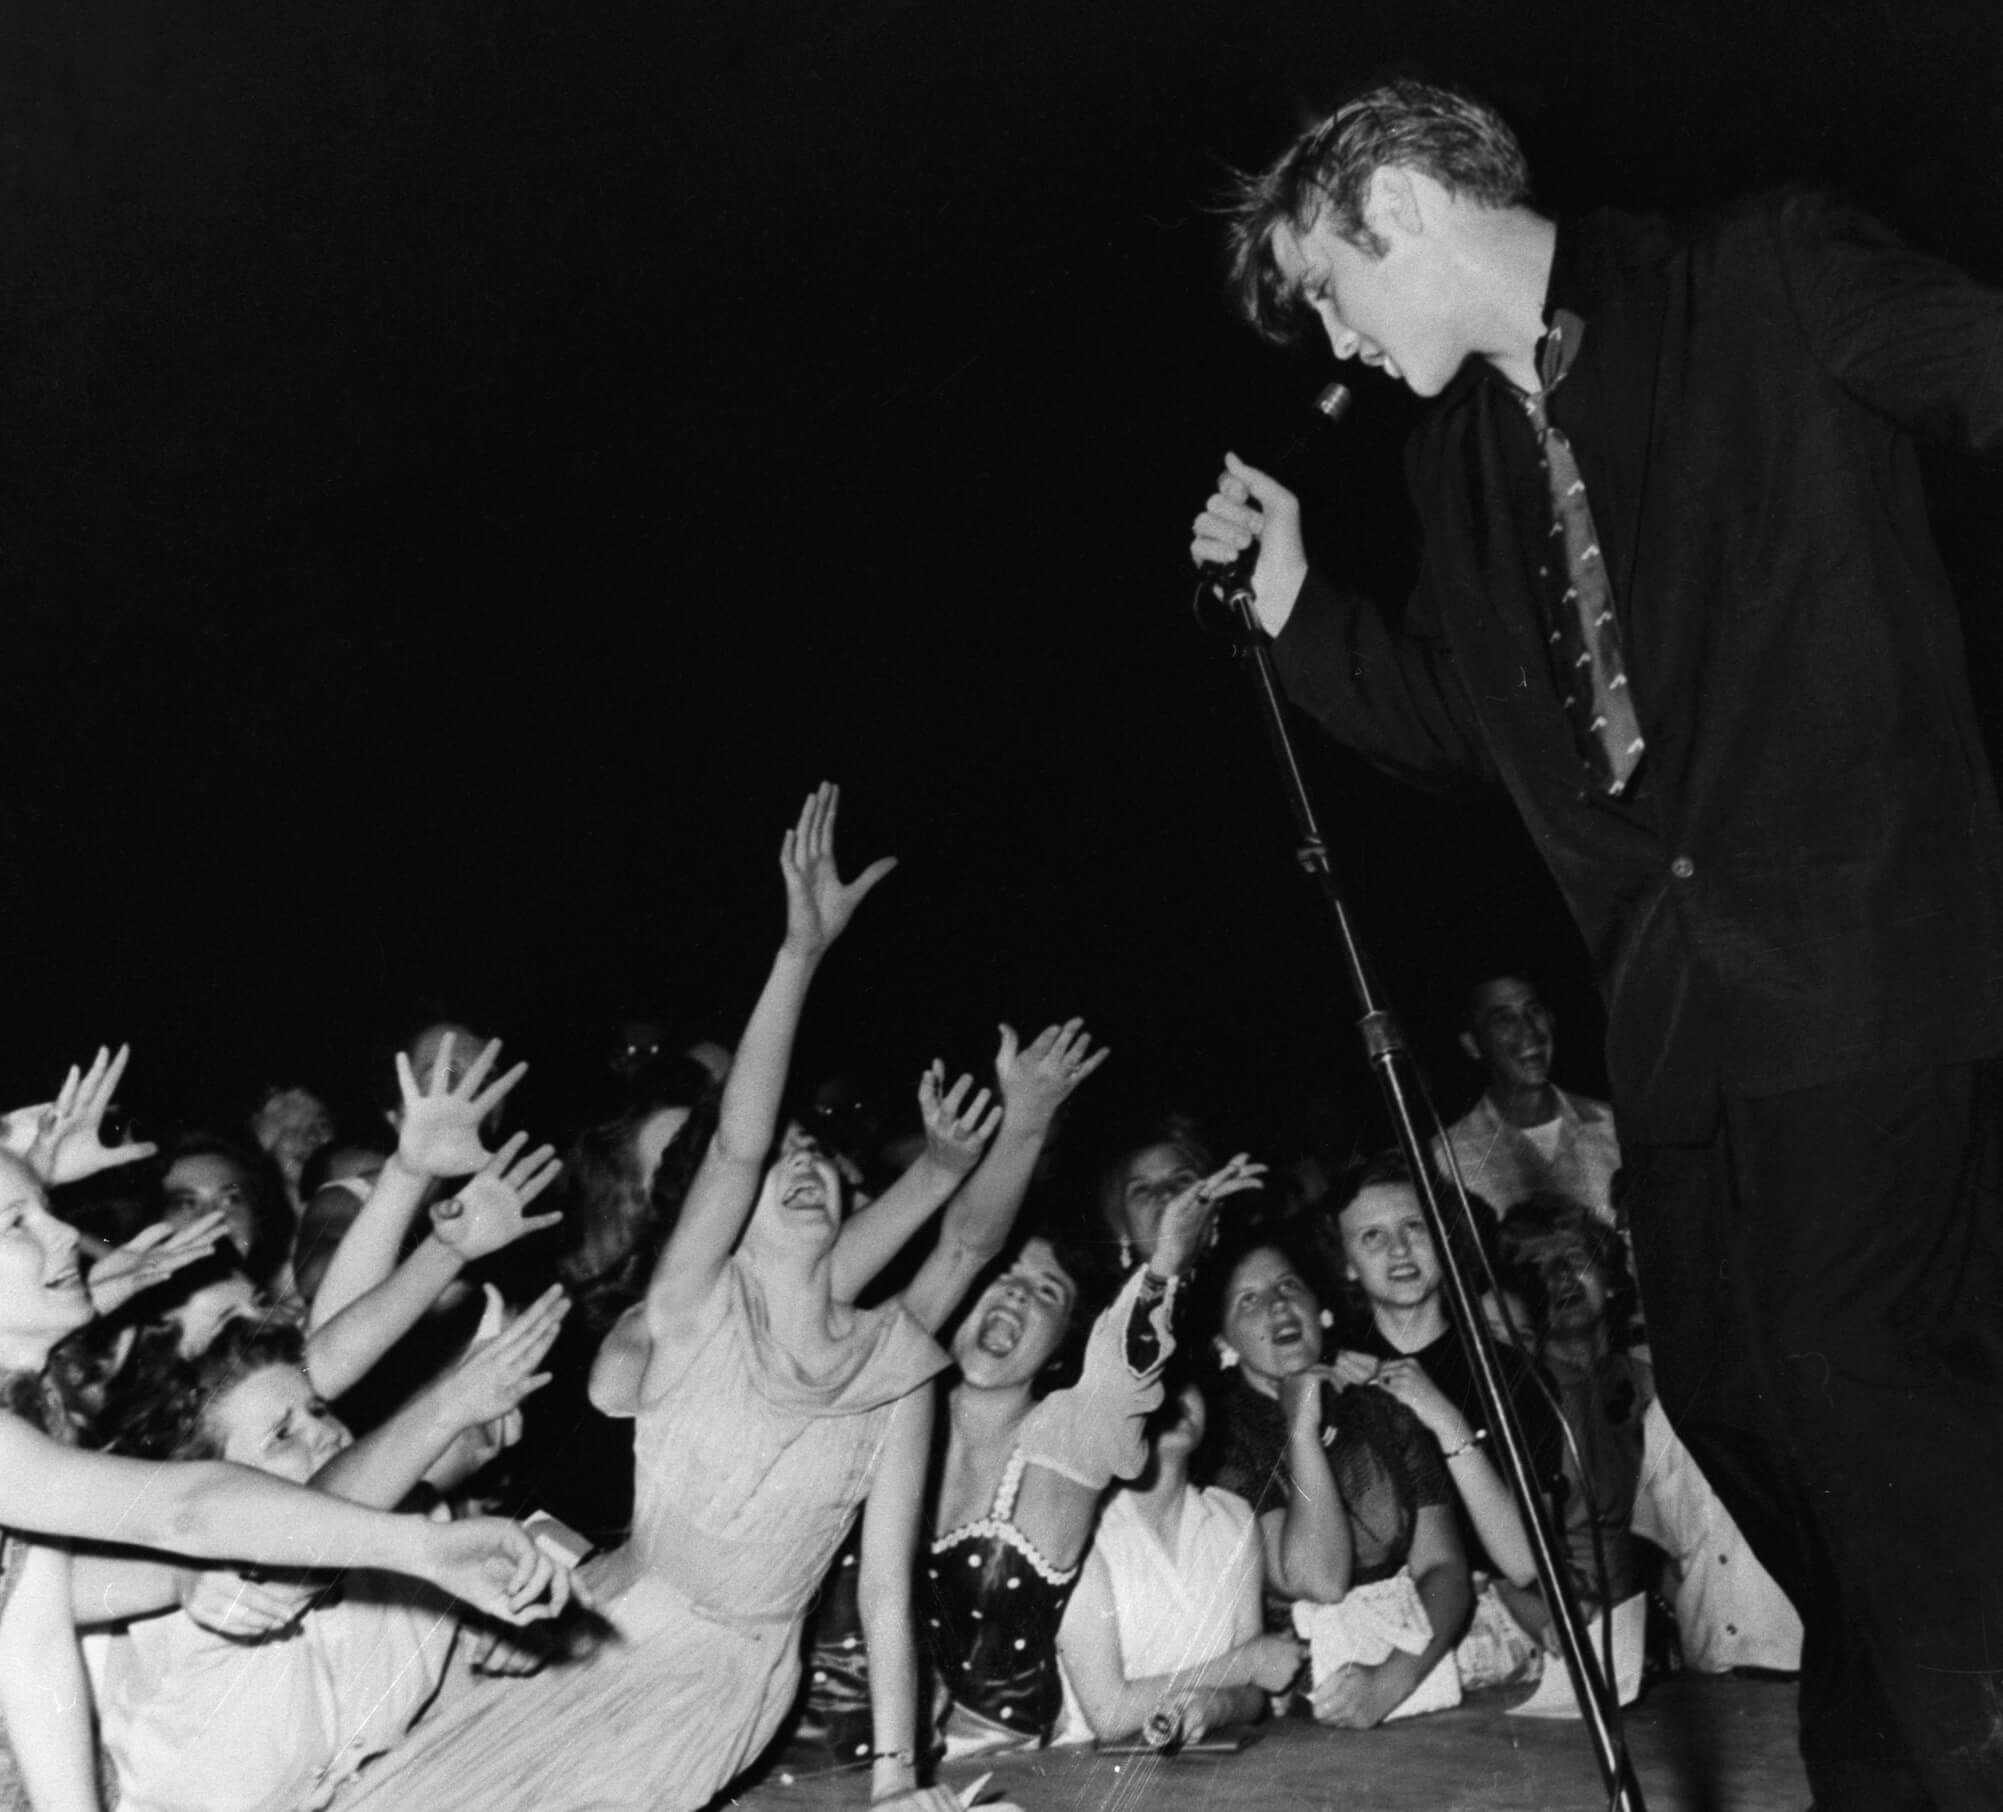 A black and white picture of Elvis standing onstage and singing to fans, who reach up towards him.